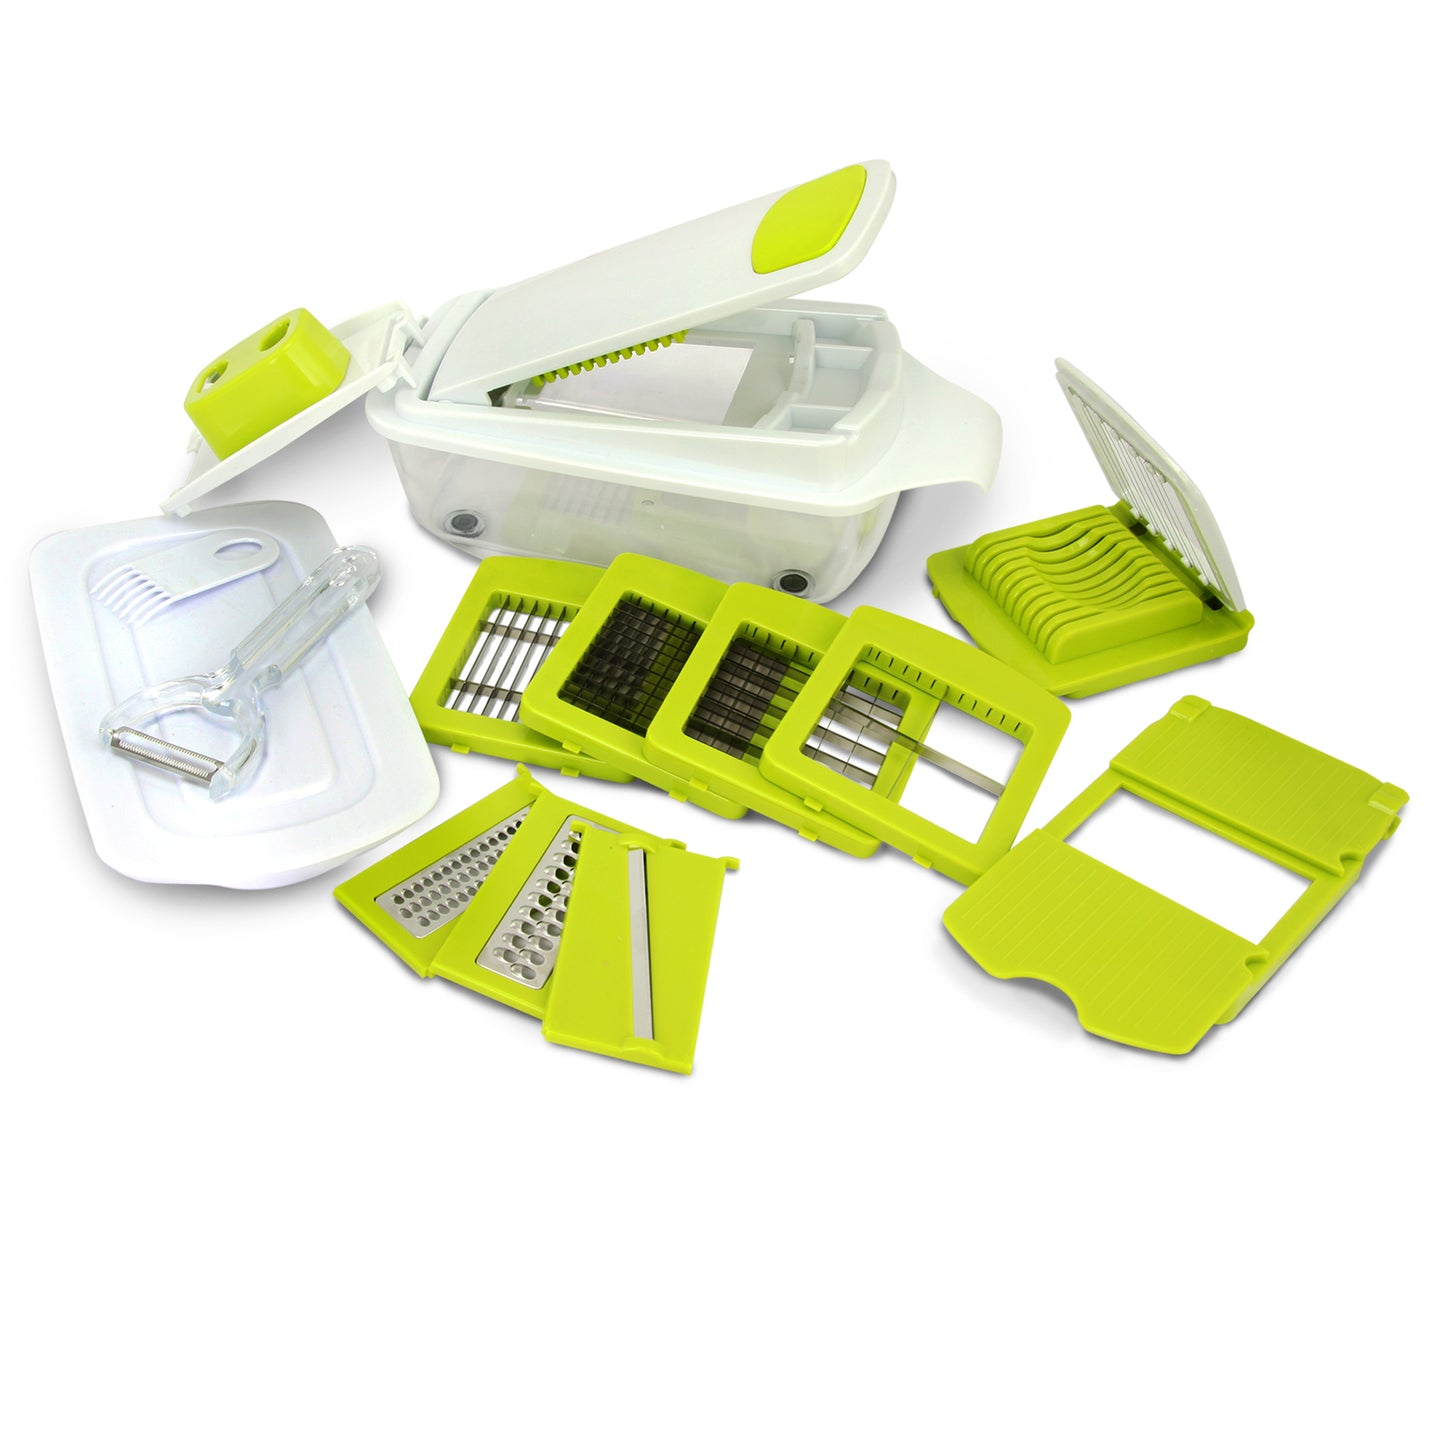 MegaChef 8-in-1 Multi-Use Slicer Dicer and Chopper with Interchangeable Blades, Vegetable and Fruit Peeler and Soft Slicer